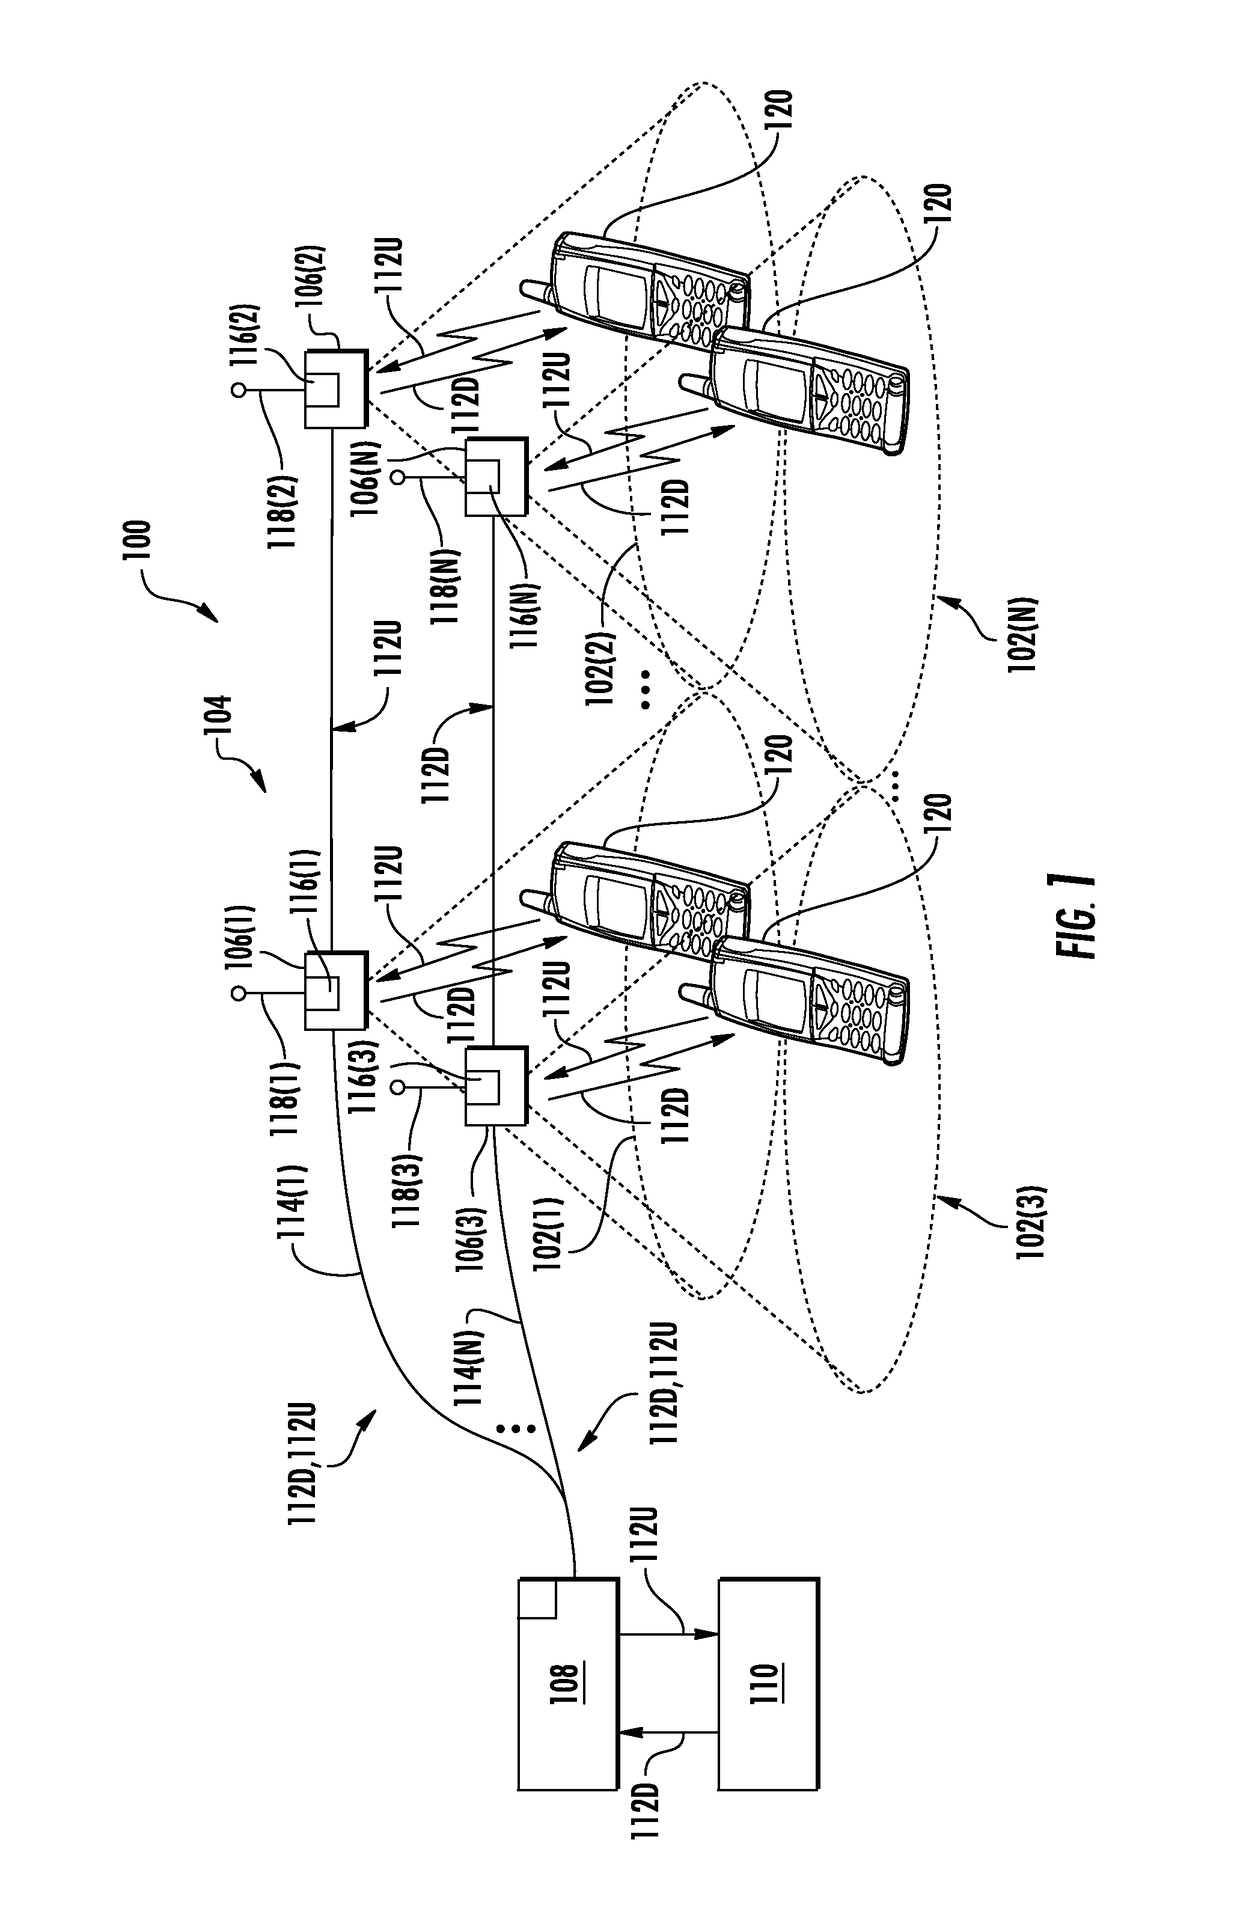 Distributing multiple-input, multiple-output (MIMO) communications streams to remove units in a distributed communication system (DCS) to support configuration of interleaved MIMO communications services